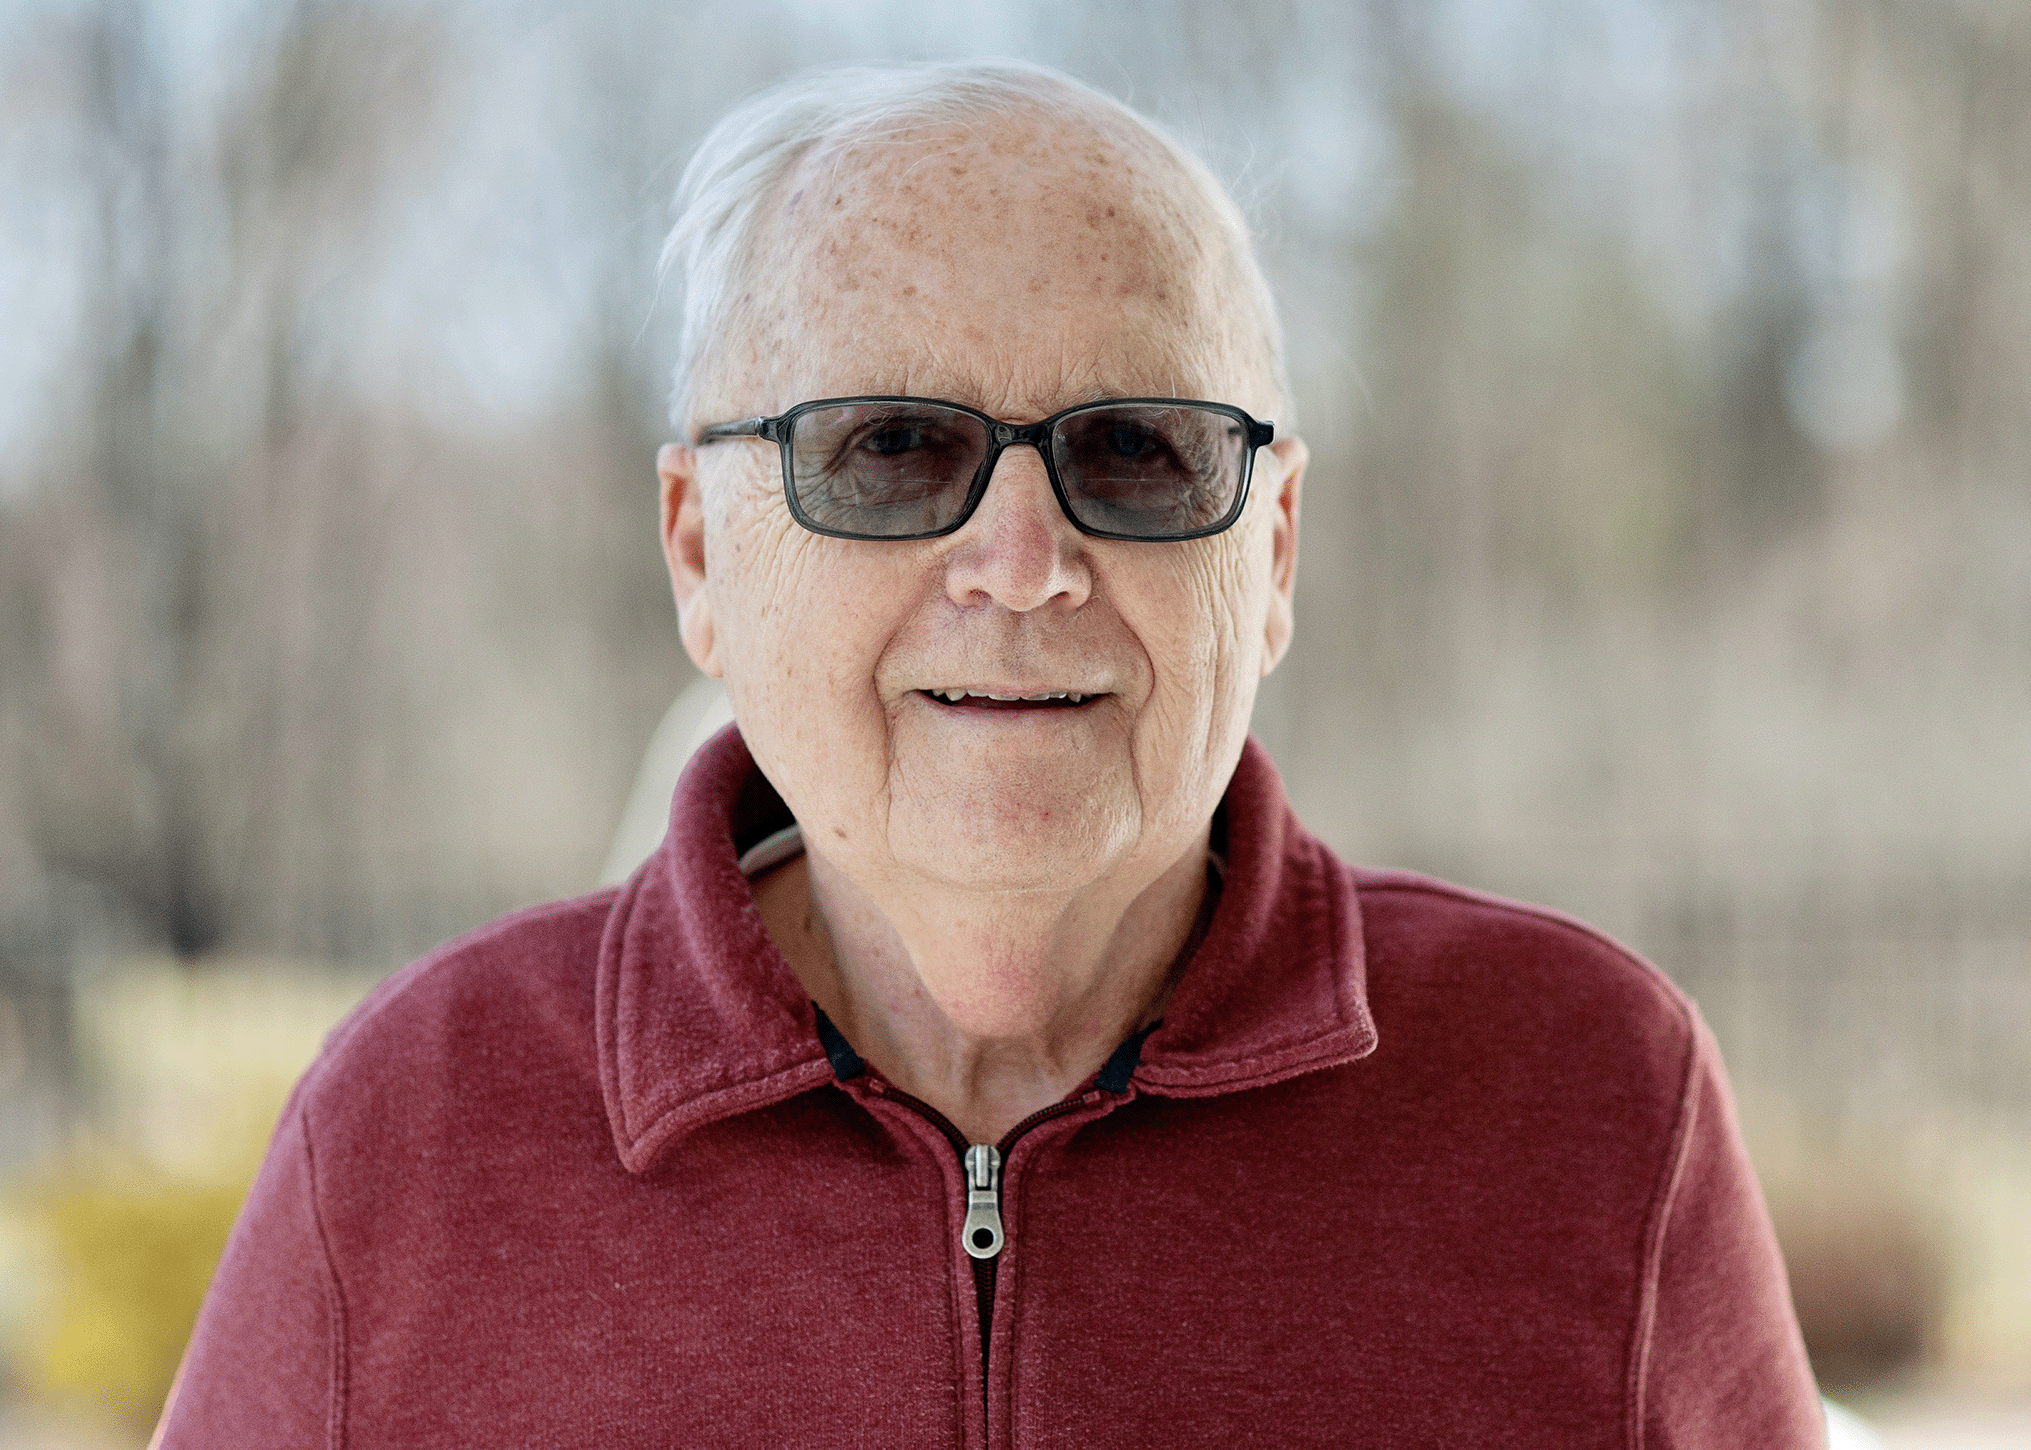 Headshot of Stephen Rojcewicz smiling in sunglasses and a red jacket